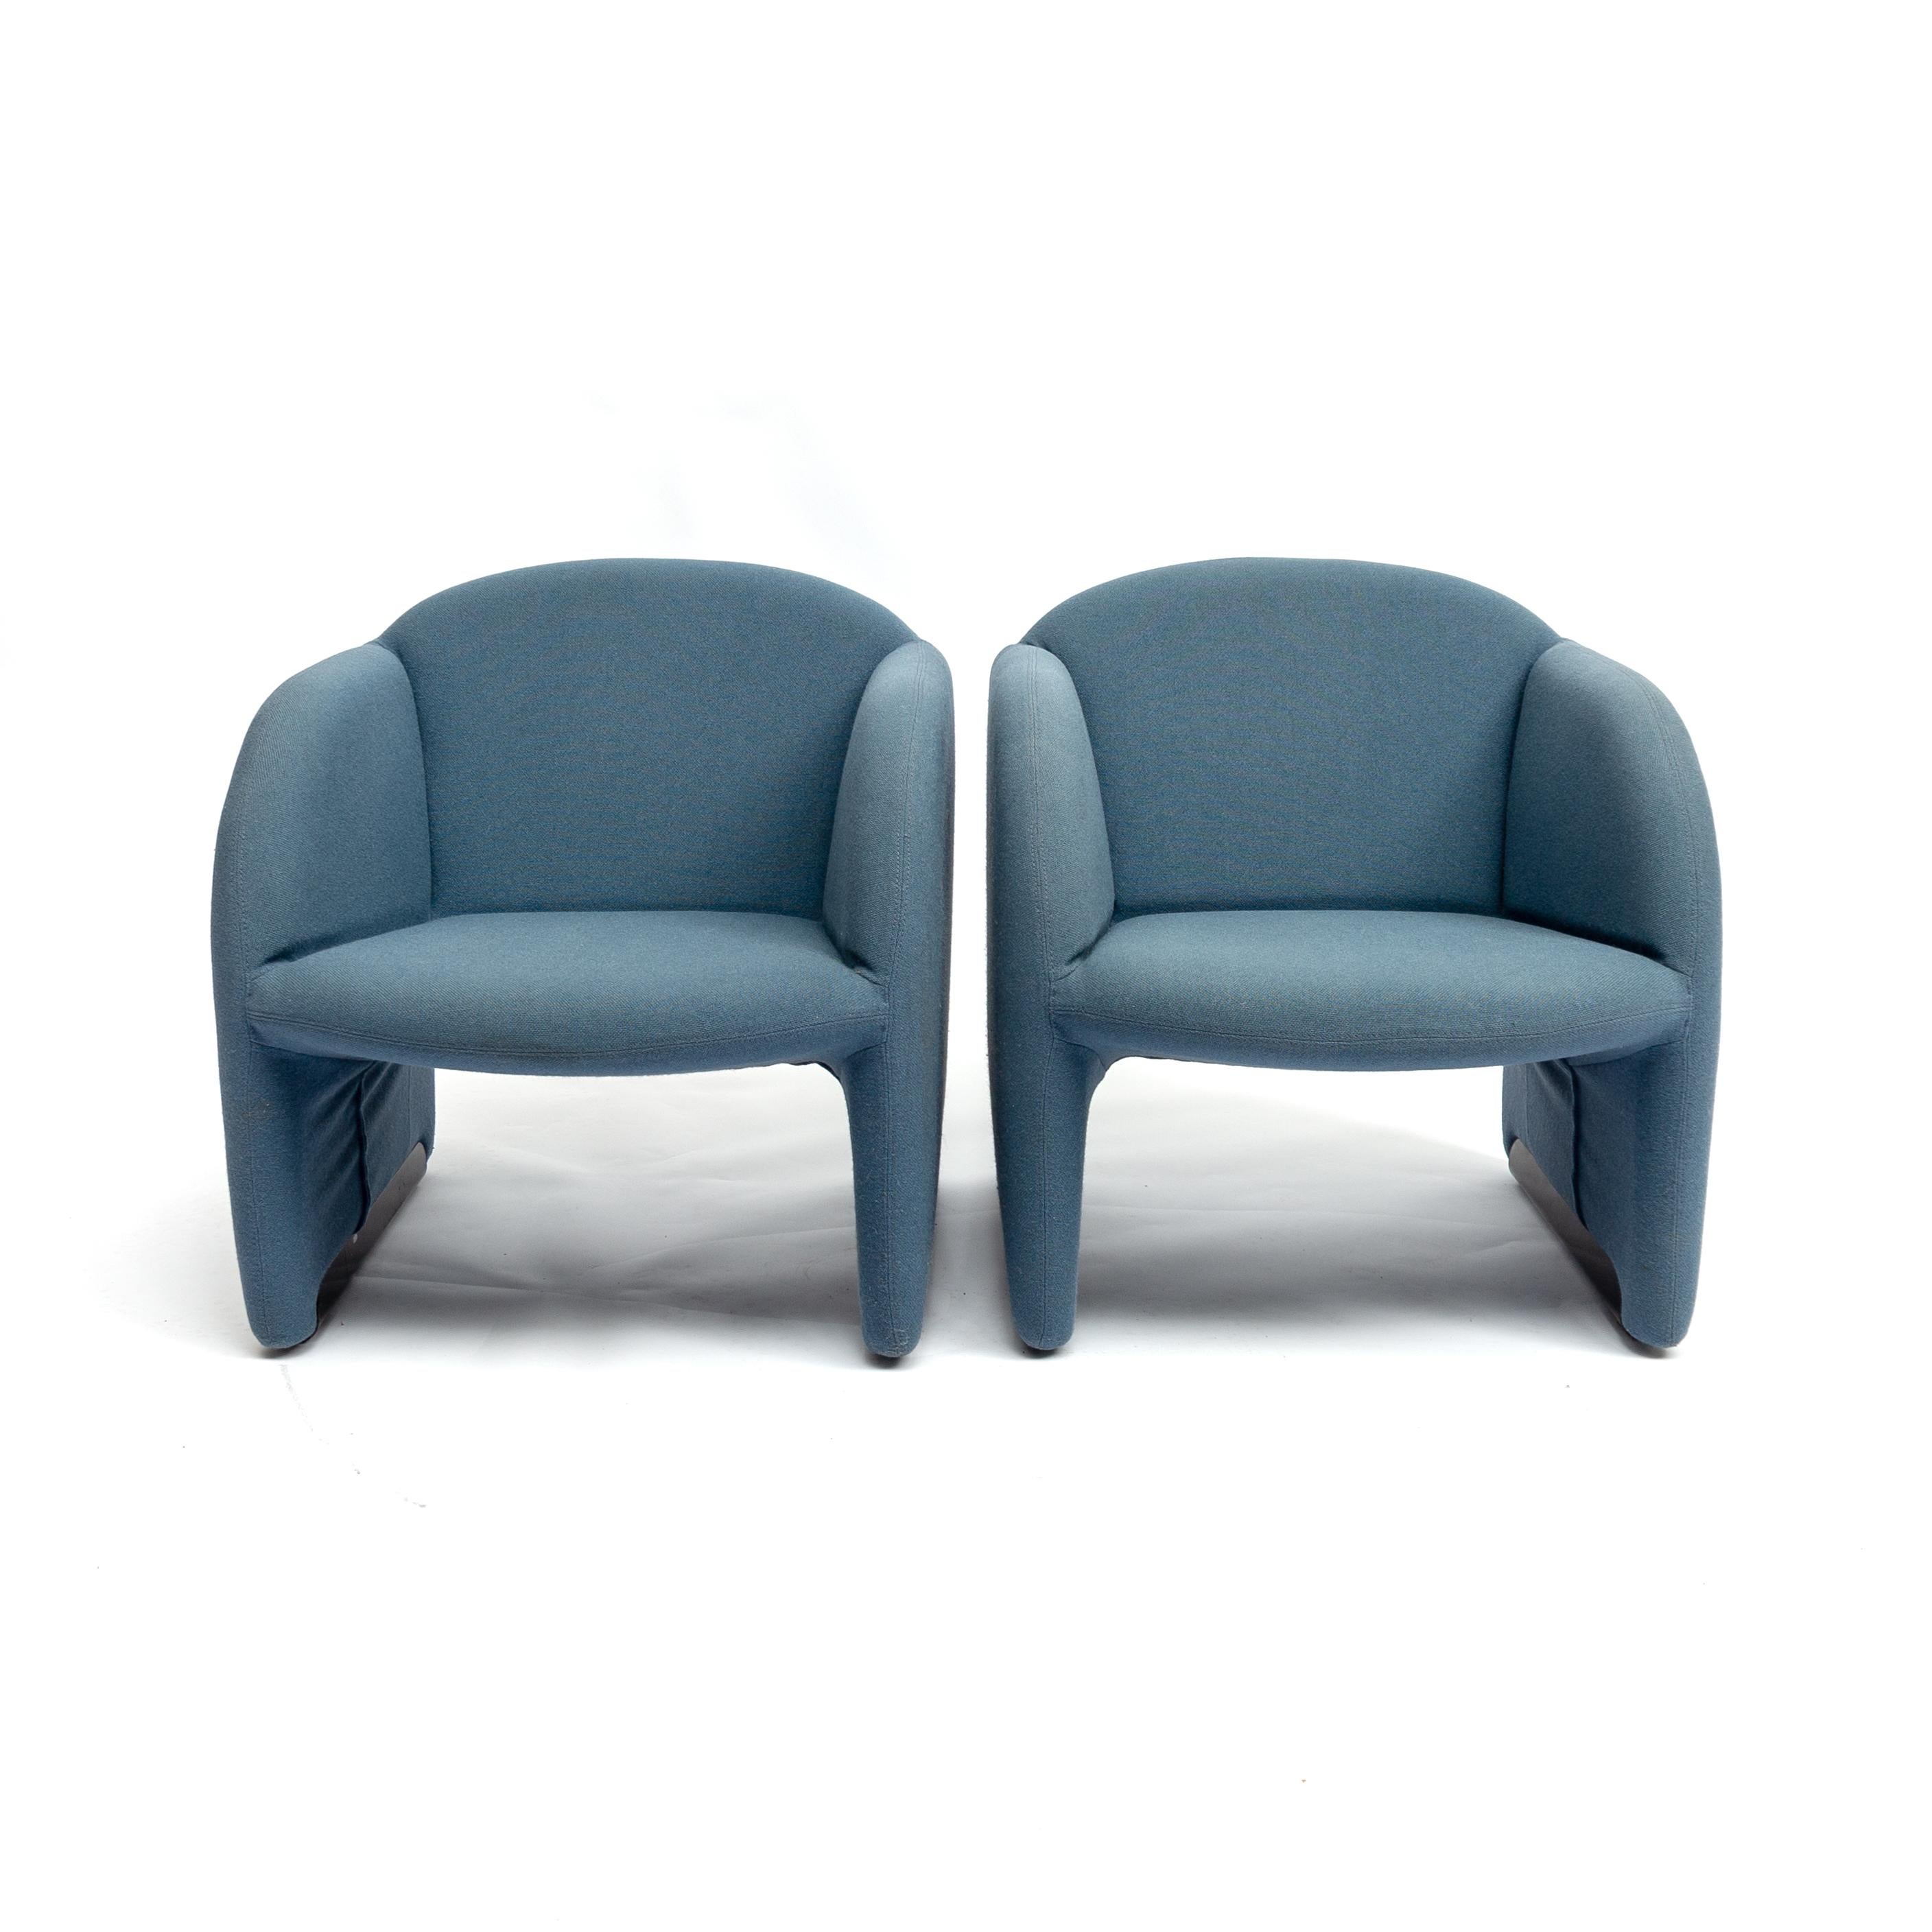 In the late 1960s and early 1970s French designer Pierre Paulin created several sculptural masterpieces for Dutch manufacturer Artifort. We are happy to offer a beautiful set of Artifort “Ben” armchairs in original blue woolen fabric on black